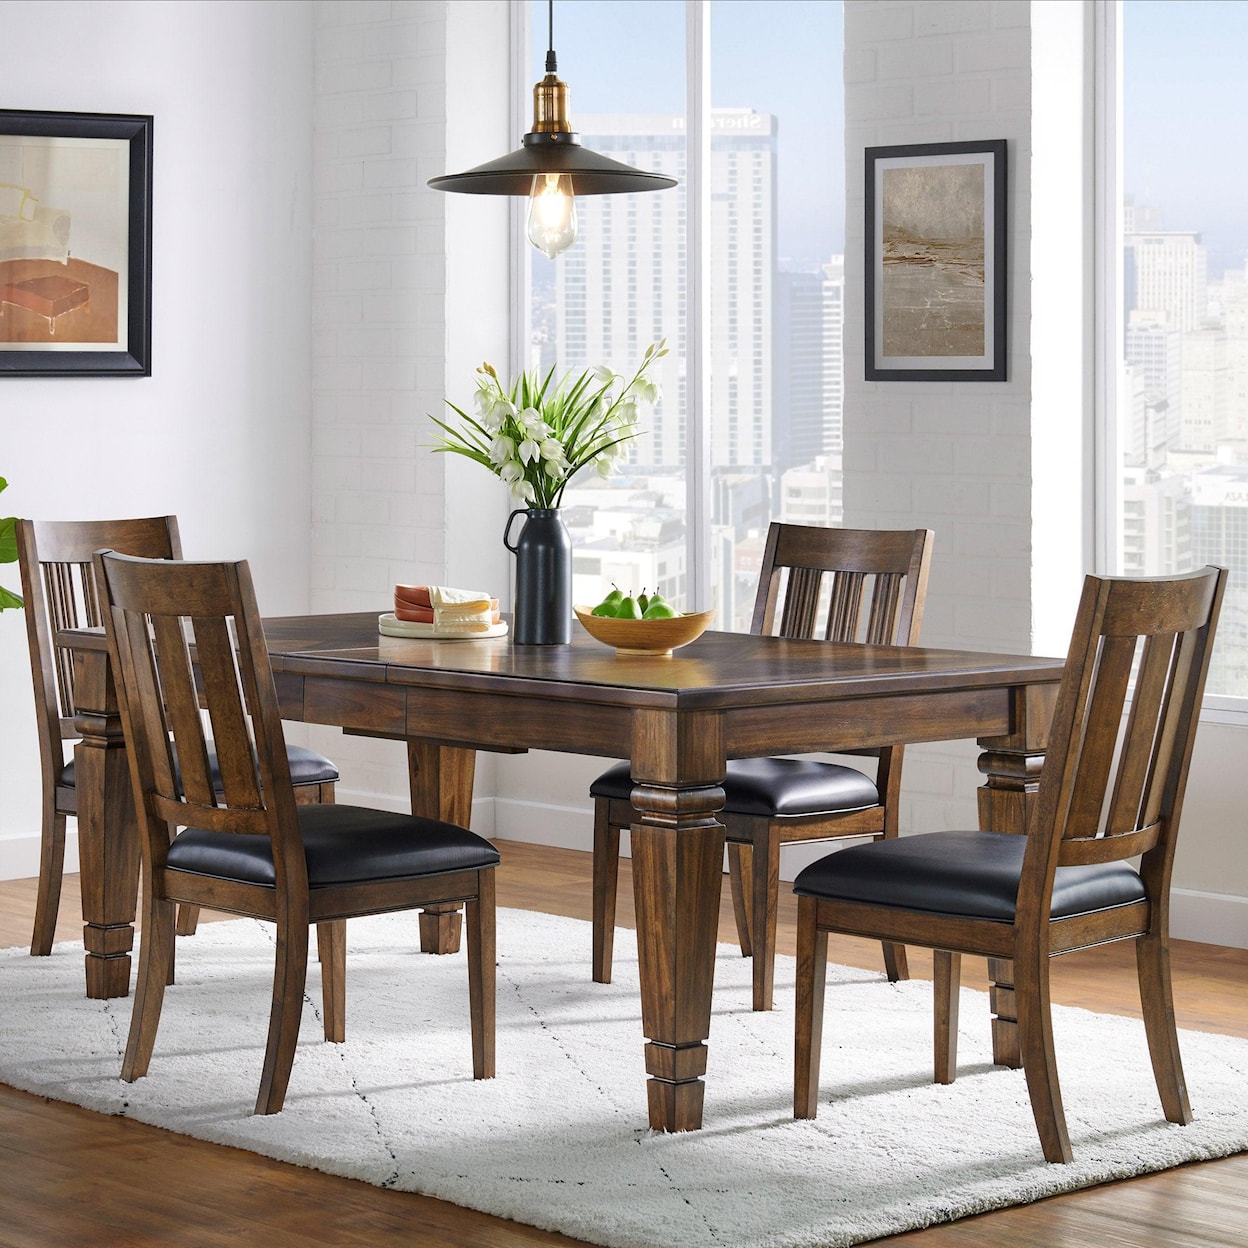 Dealer Brand Airleigh Dining Table with 4 Chairs